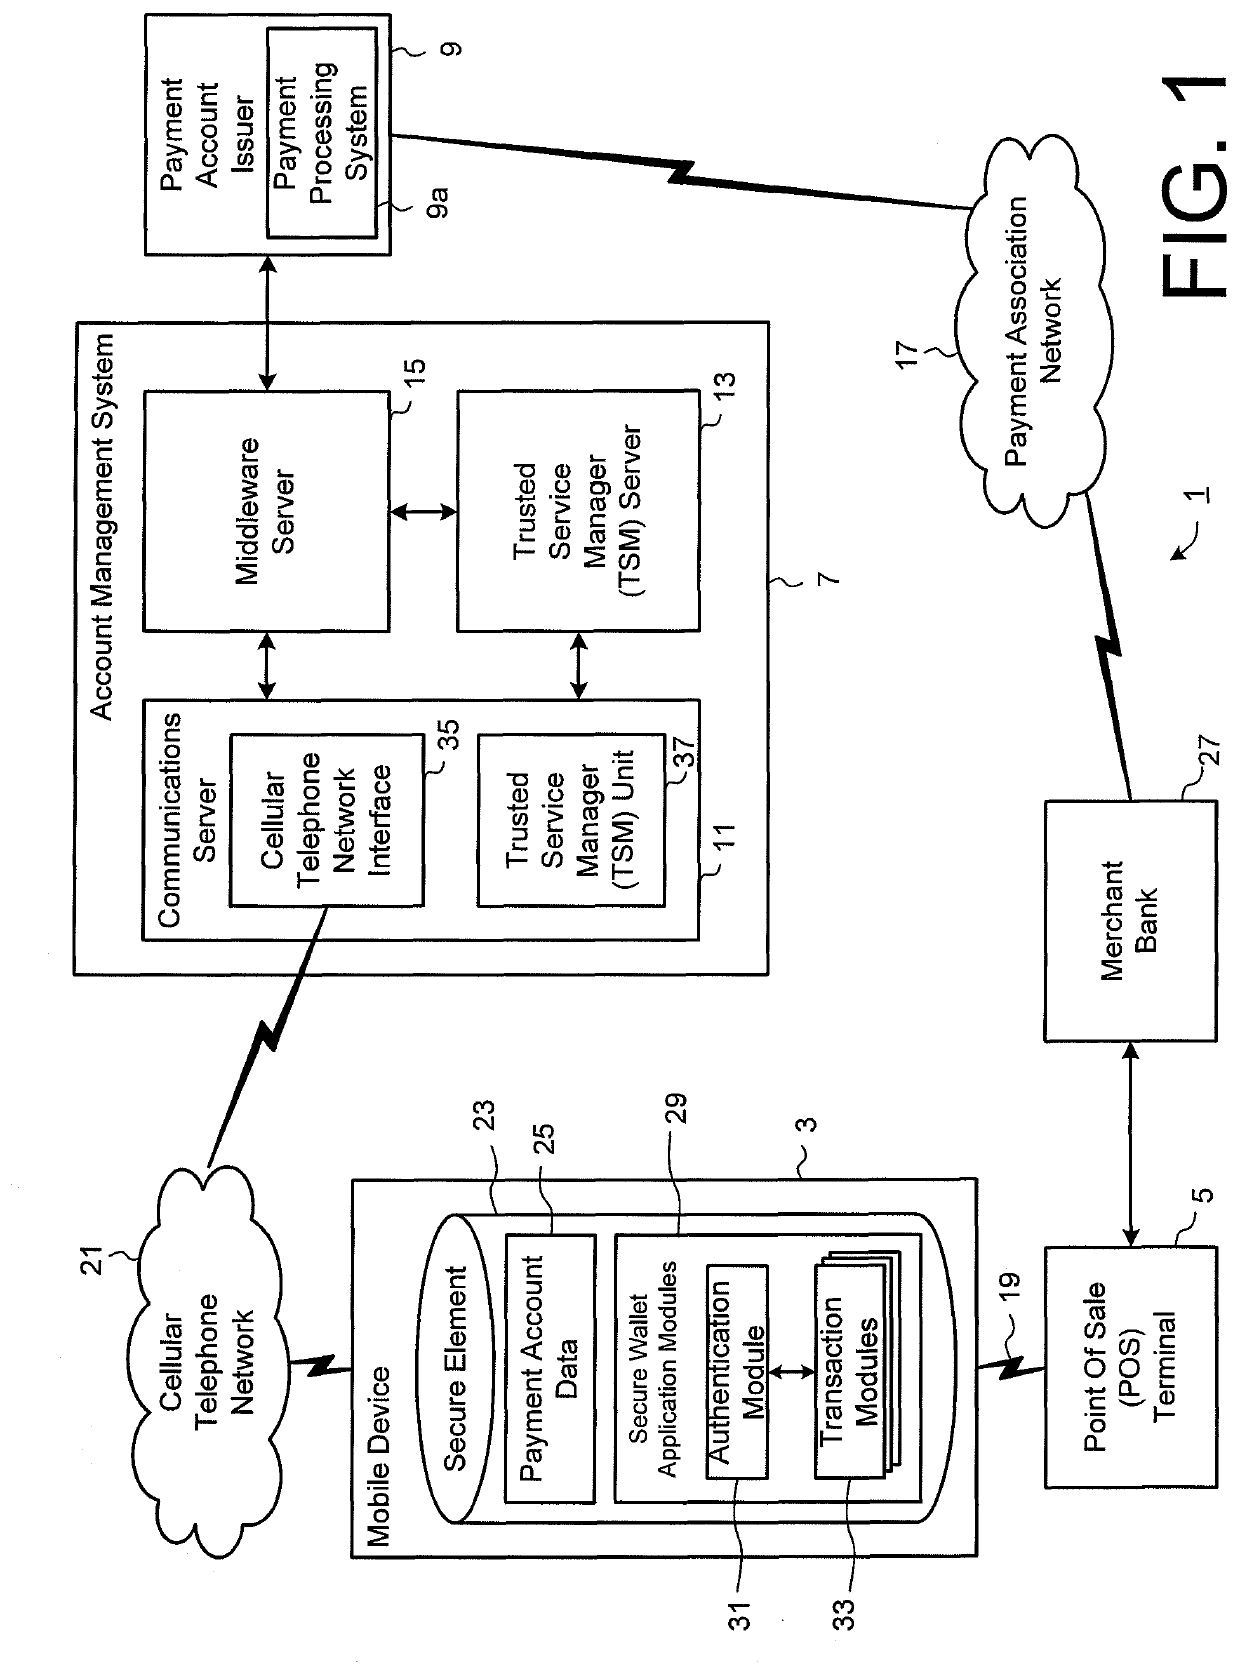 Method and system for electronic wallet access